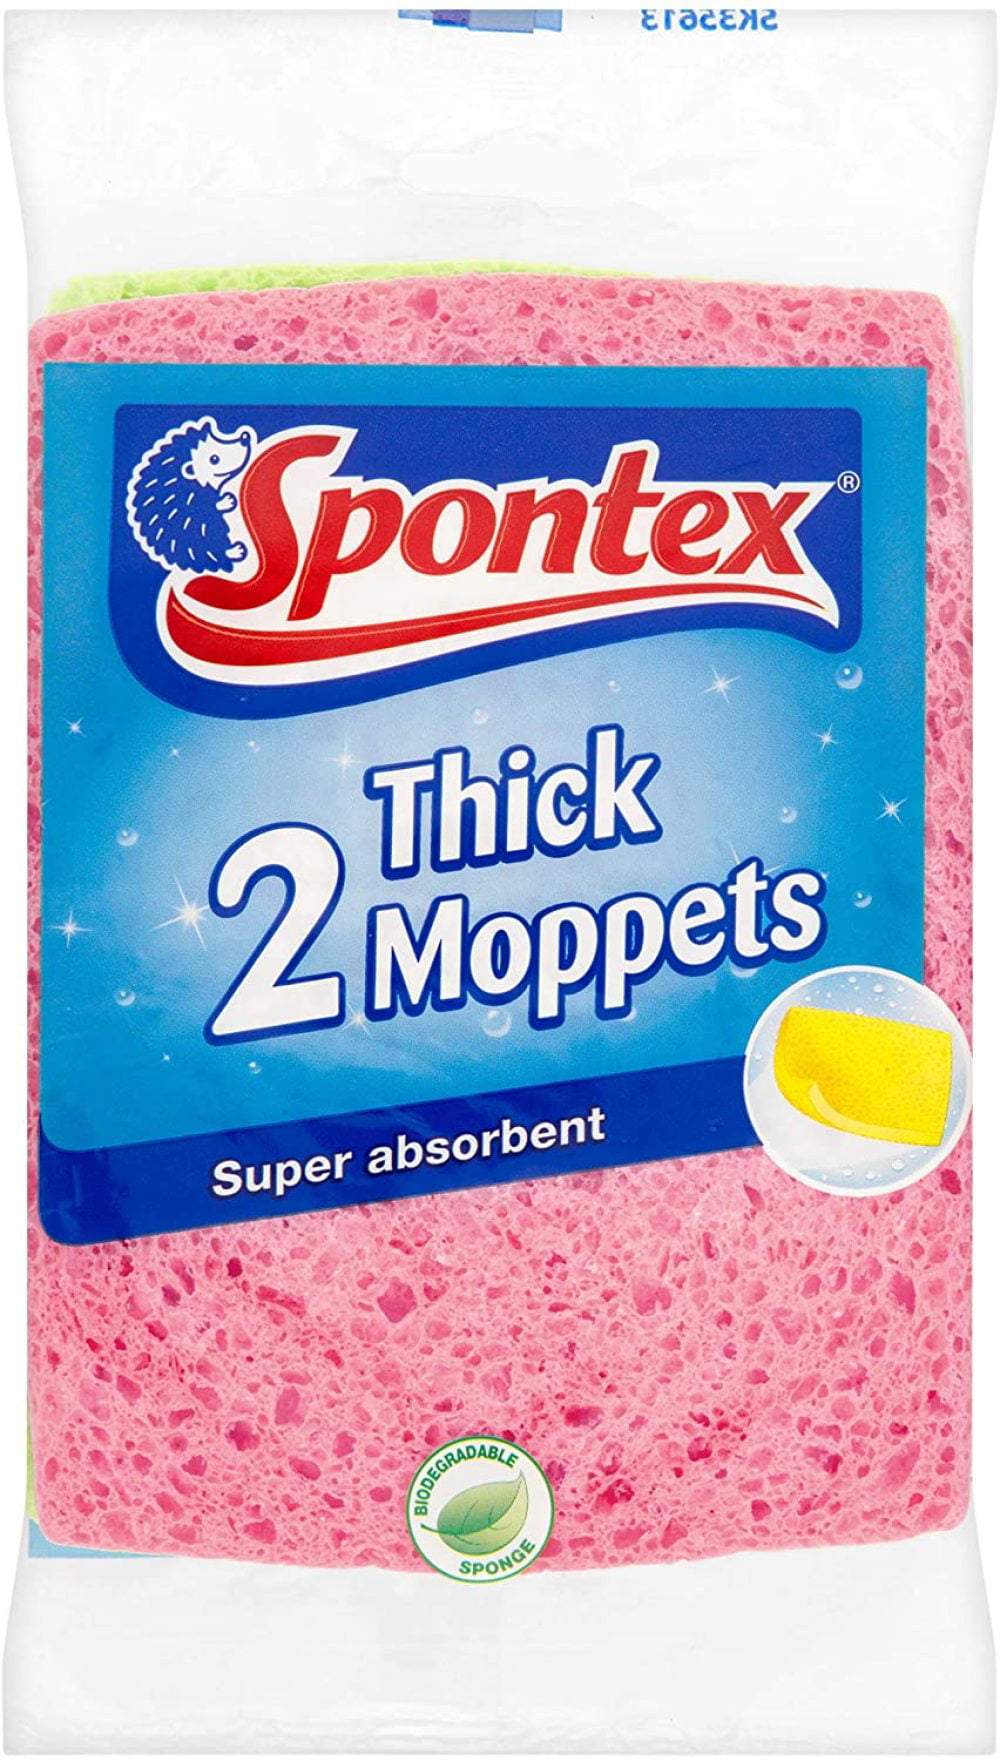 Spontex Hygienic Thick Moppets Pack of 2 